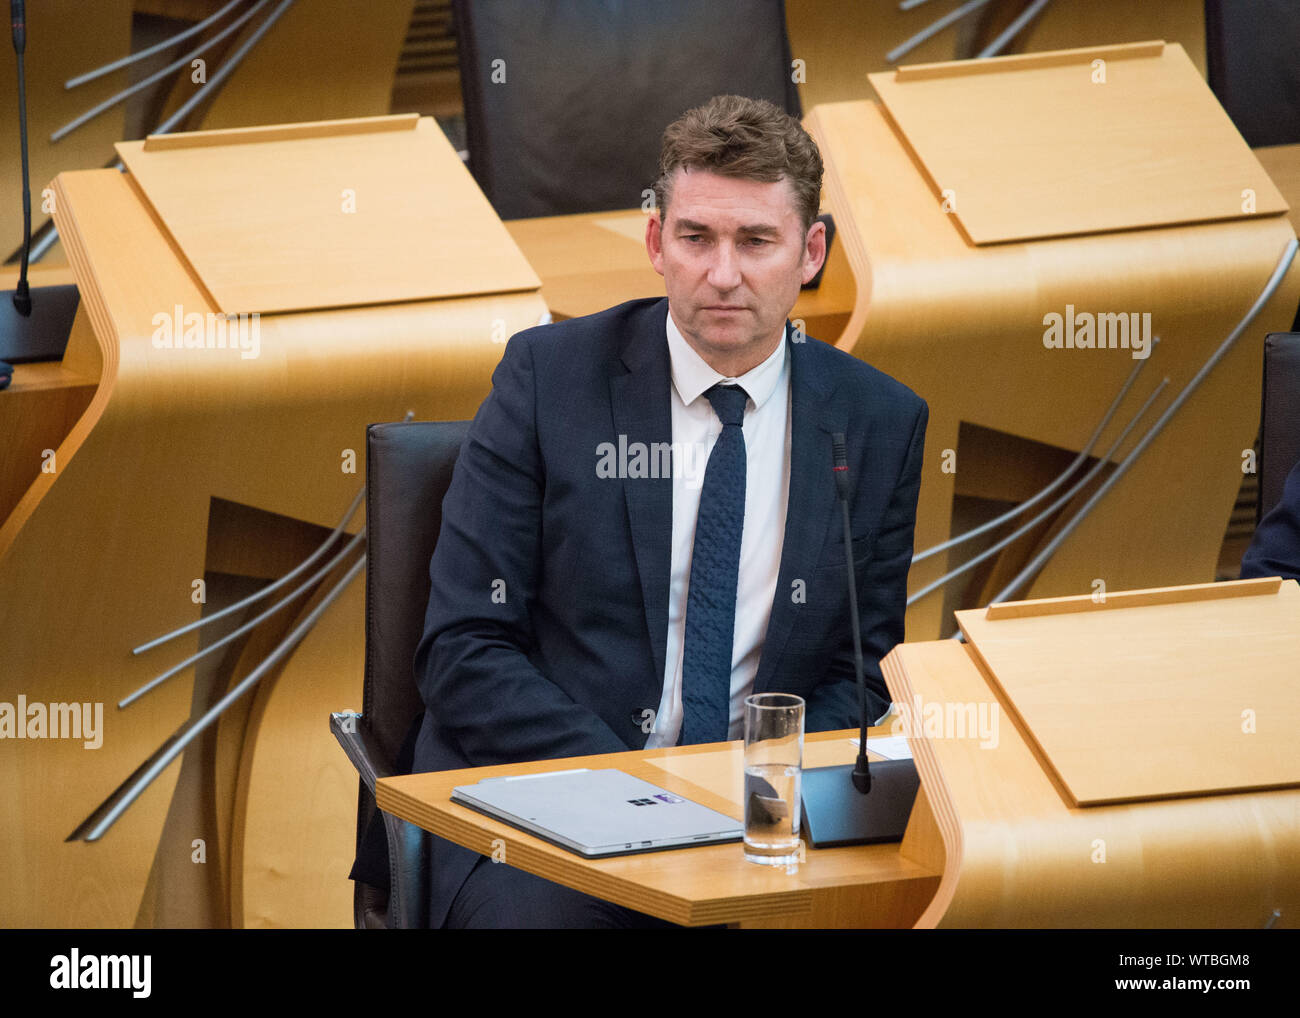 Edinburgh, UK. 5 September 2019. Pictured: Brian Whittle MSP - Shadow Cabinet Secretary for Sport & Wellbeing. Scottish Government Debate: Avoiding A No Deal Exit From The EU.  That the Parliament agrees that the UK should in no circumstances leave the EU on a no-deal basis, and condemns the Prime Minister’s suspension of the UK Parliament from as early as 9 September until 14 October 2019. The result of the division is: For 87, Against 28, Abstentions 0. Colin Fisher/CDFIMAGES.COM Stock Photo